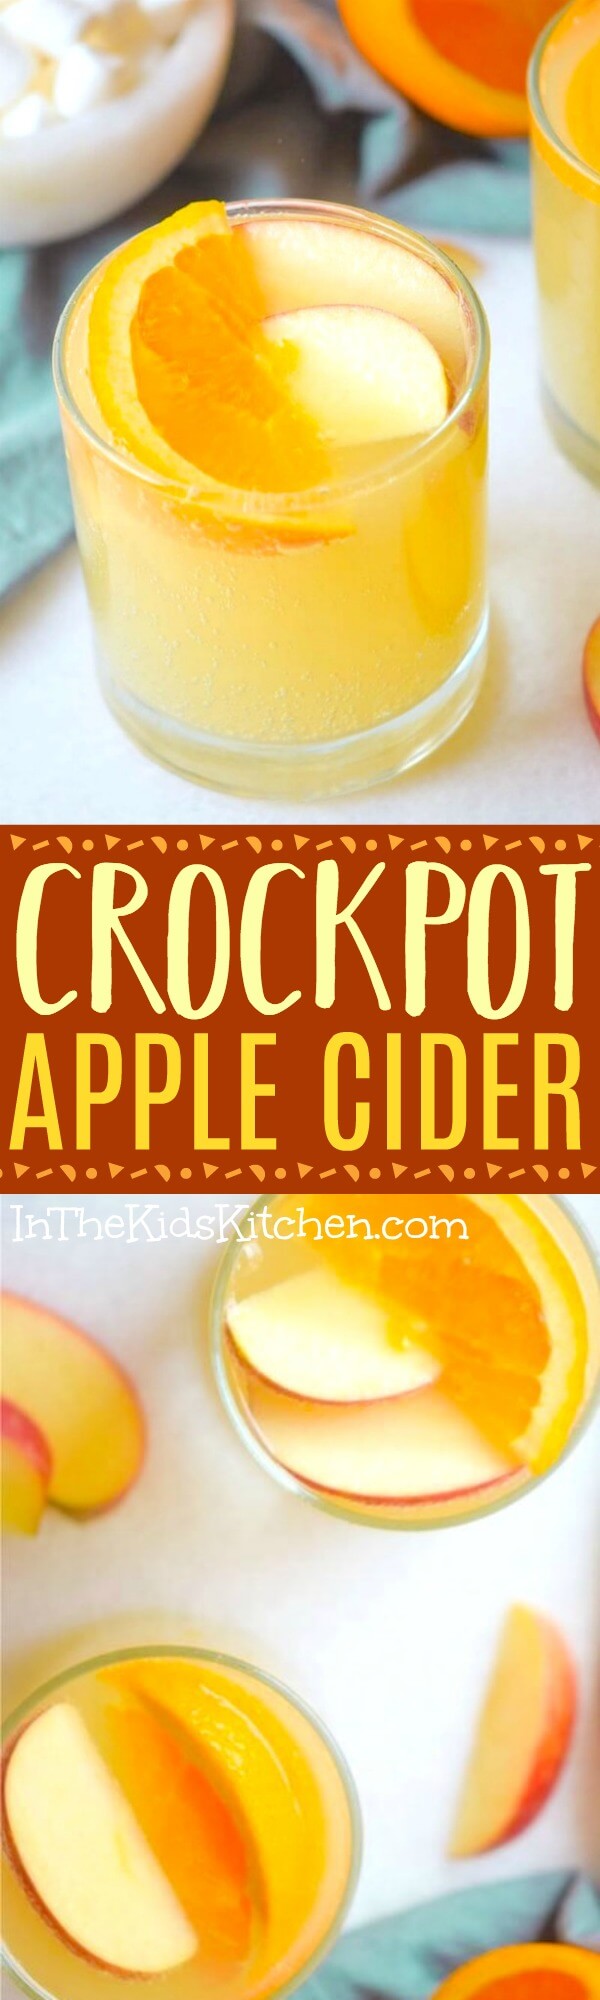 A kid-friendly crockpot apple cider that's both easy to make and will have your house smelling like fall all day! Easy recipe with real fruit.